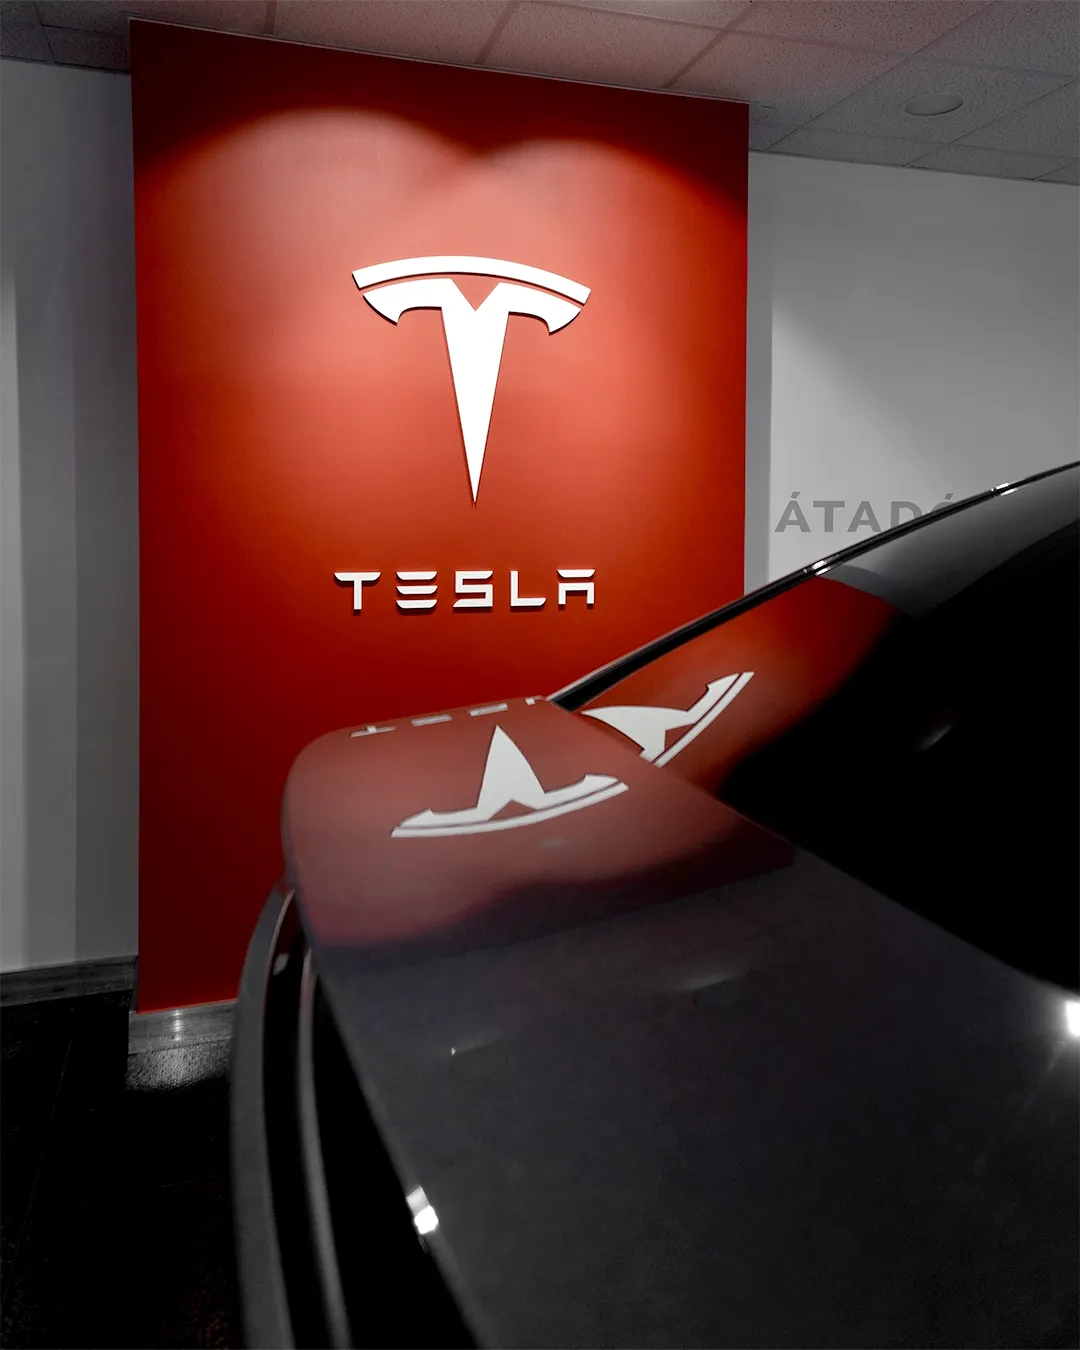 Tesla's First Indian Plant: Gujarat Deal in Final Stages